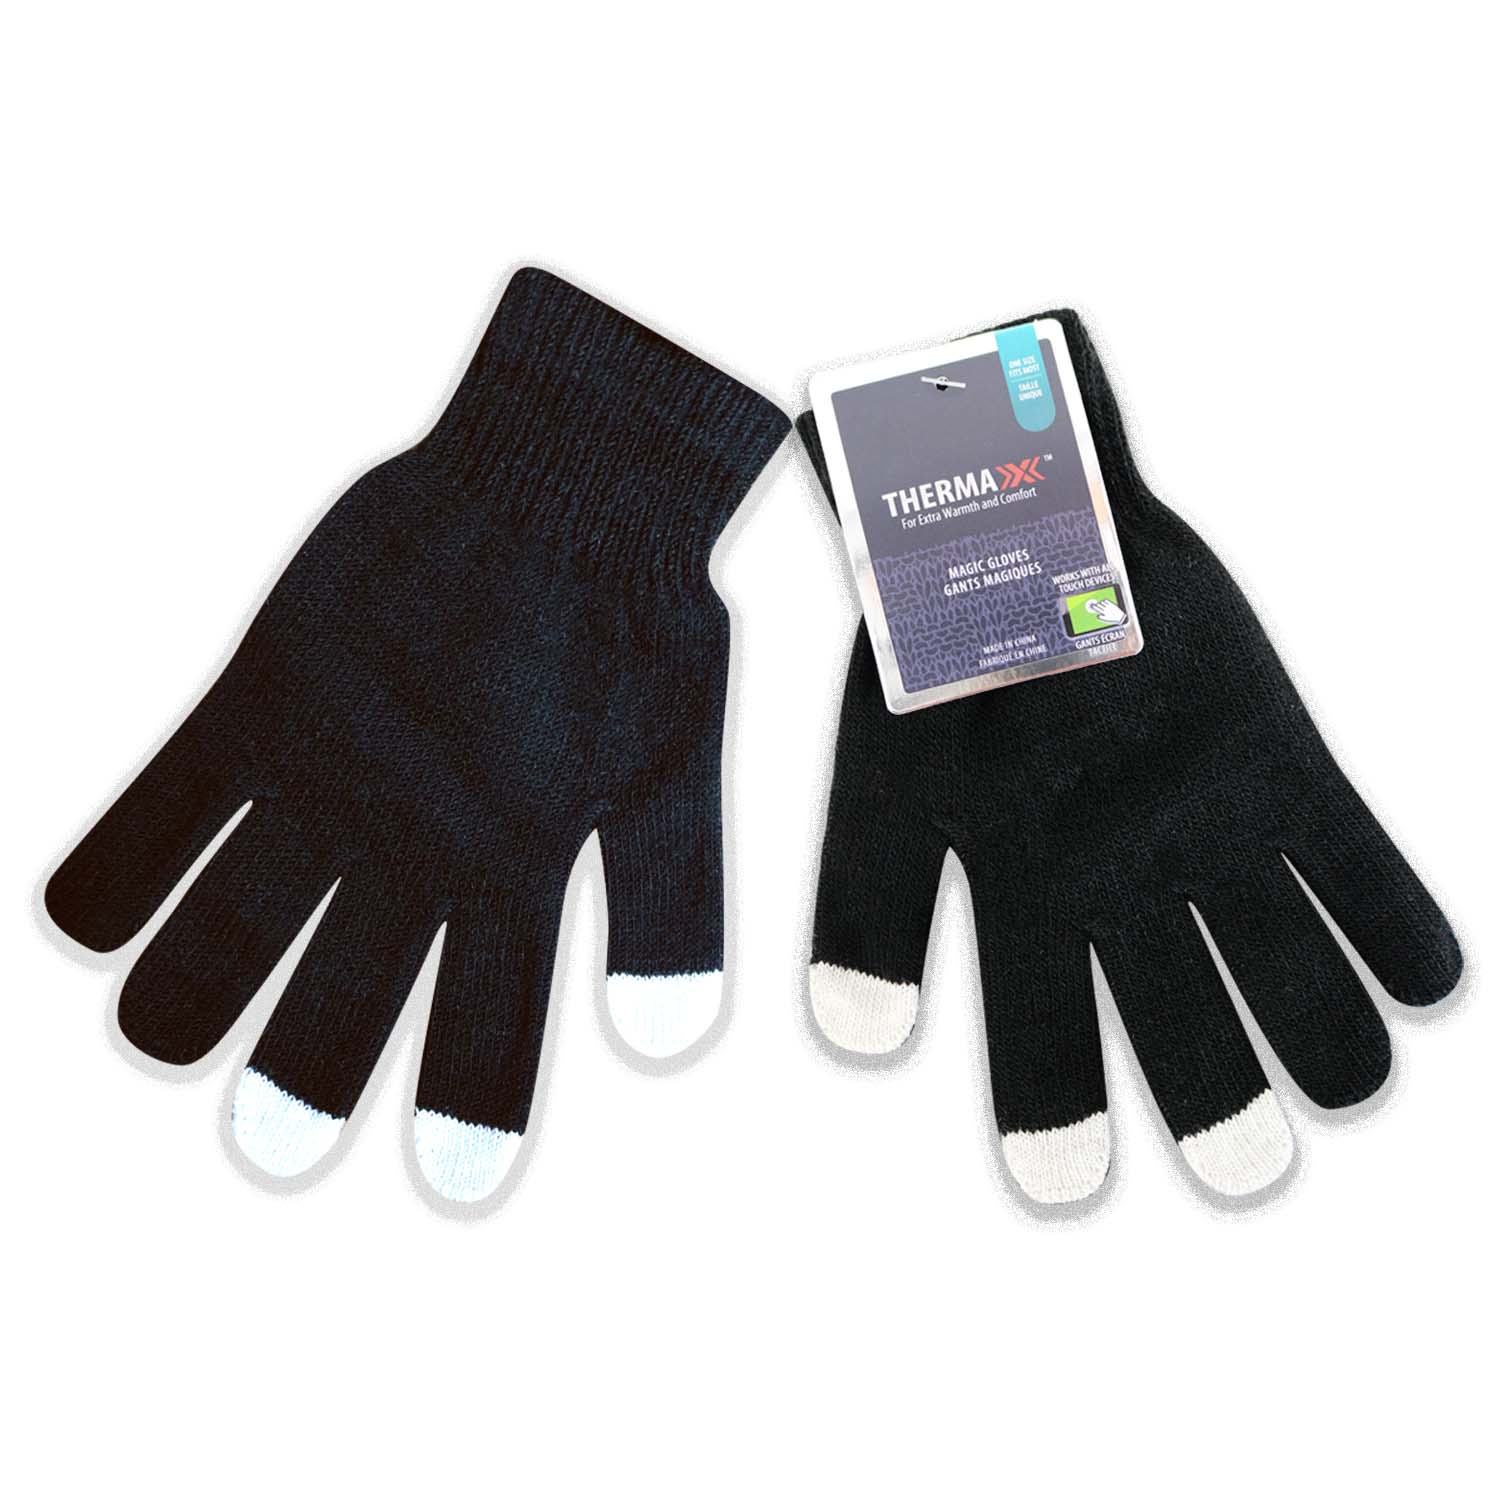 Unisex Wholesale Chenille Touch Screen Gloves in Black - Bulk Case of 96 Pairs